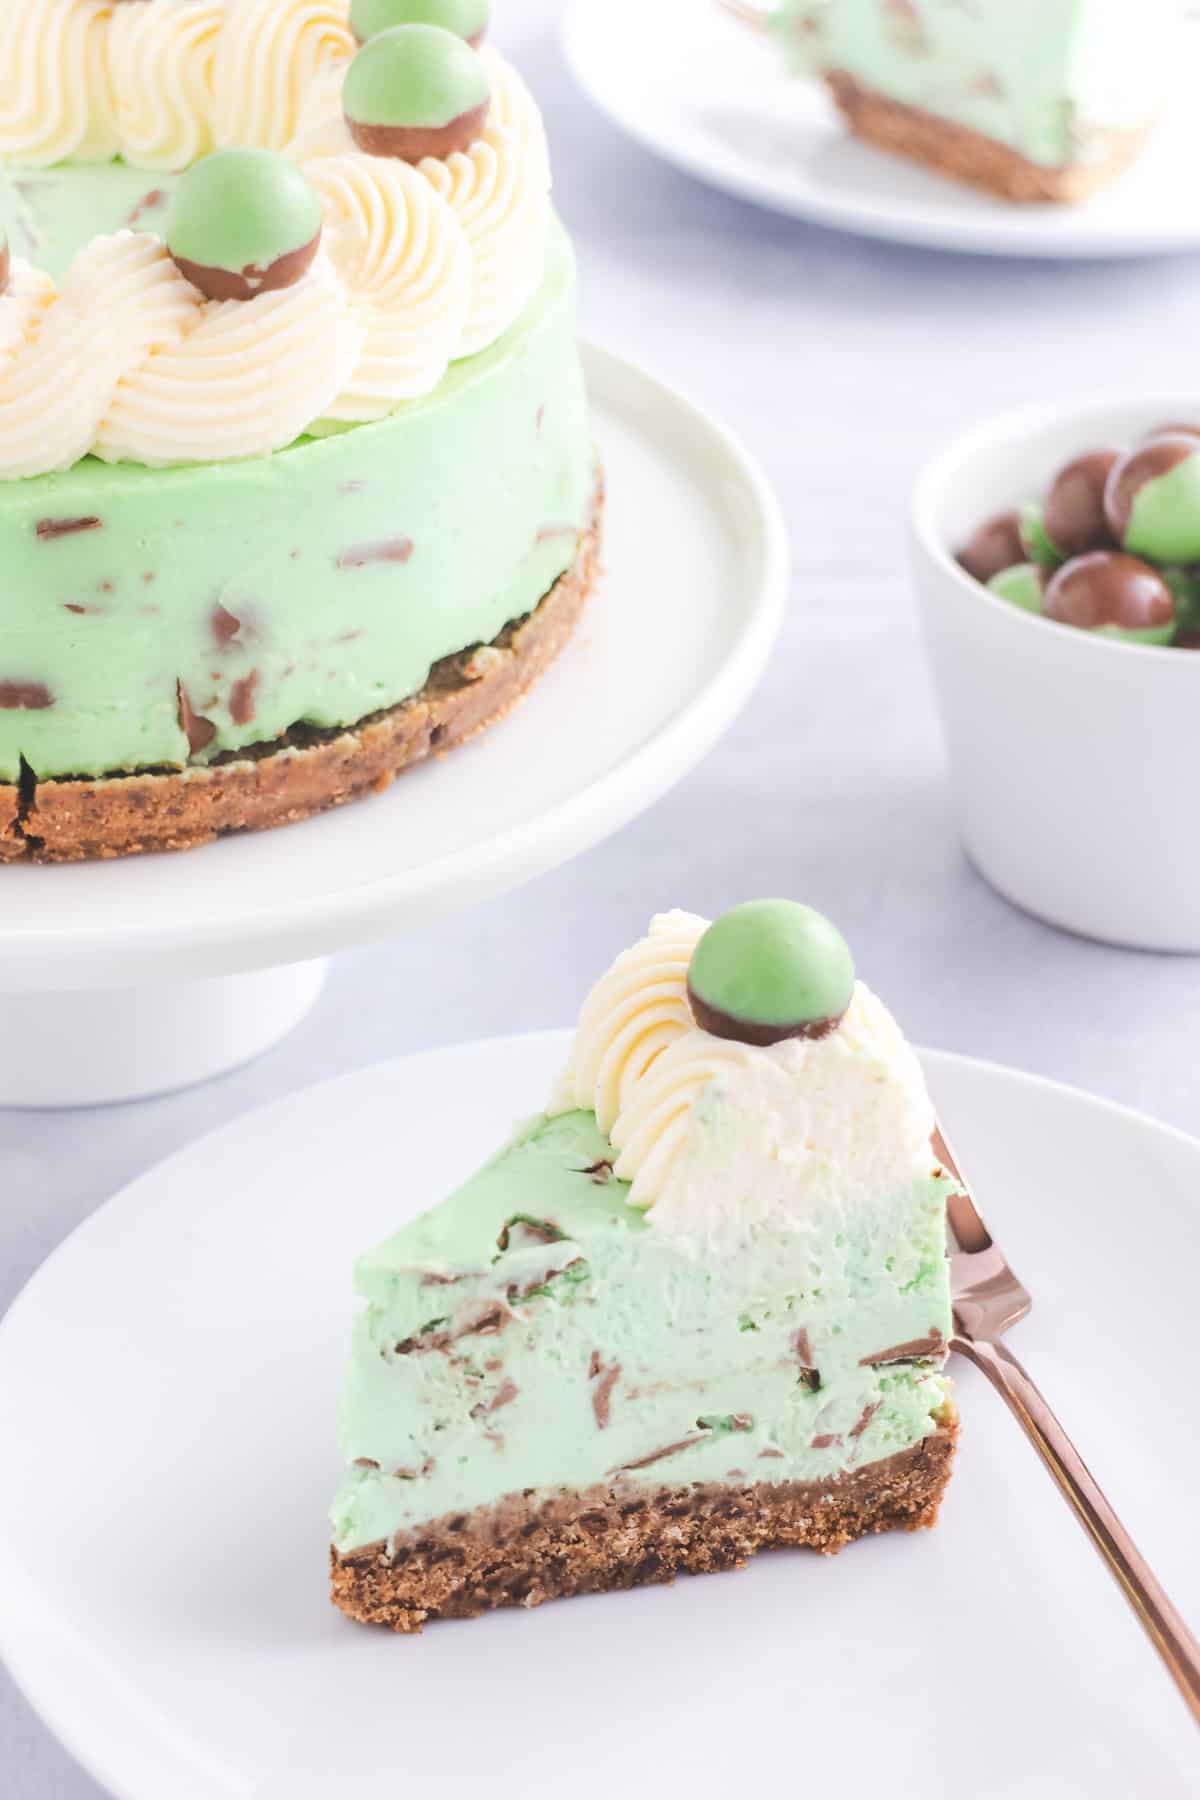 Mint green cheesecake with chunks of chocolate in the filling and topped with Mint Aero bubbles